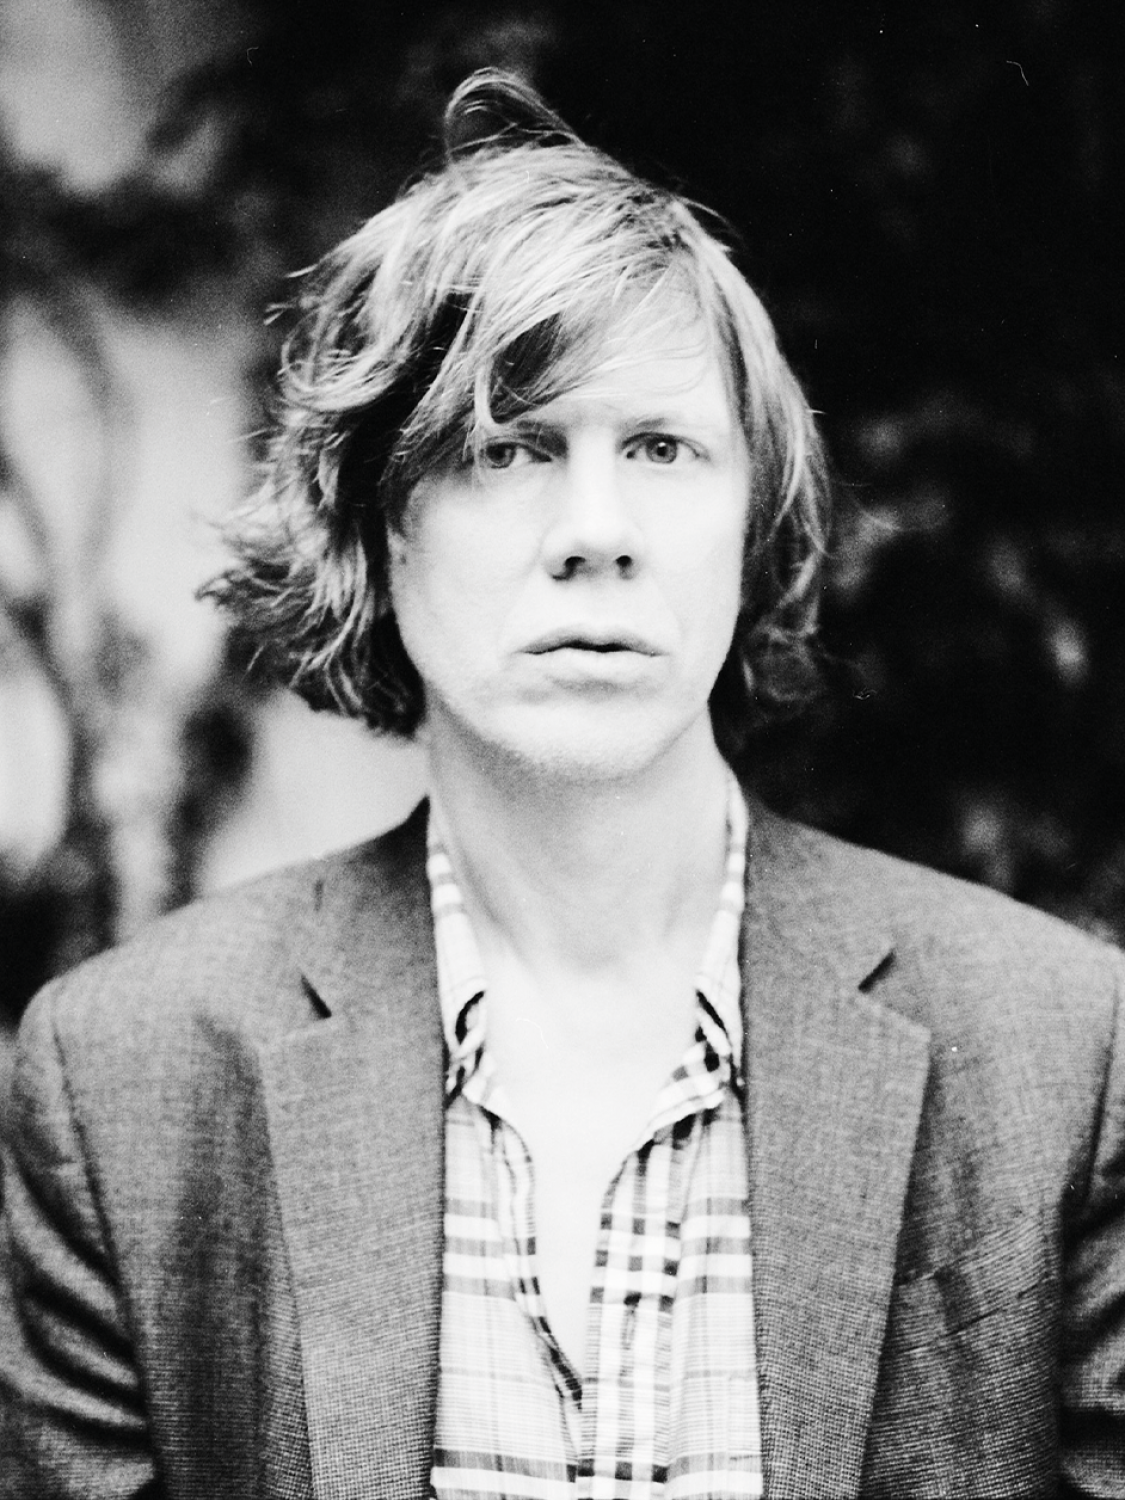 THE THURSTON MOORE GROUP